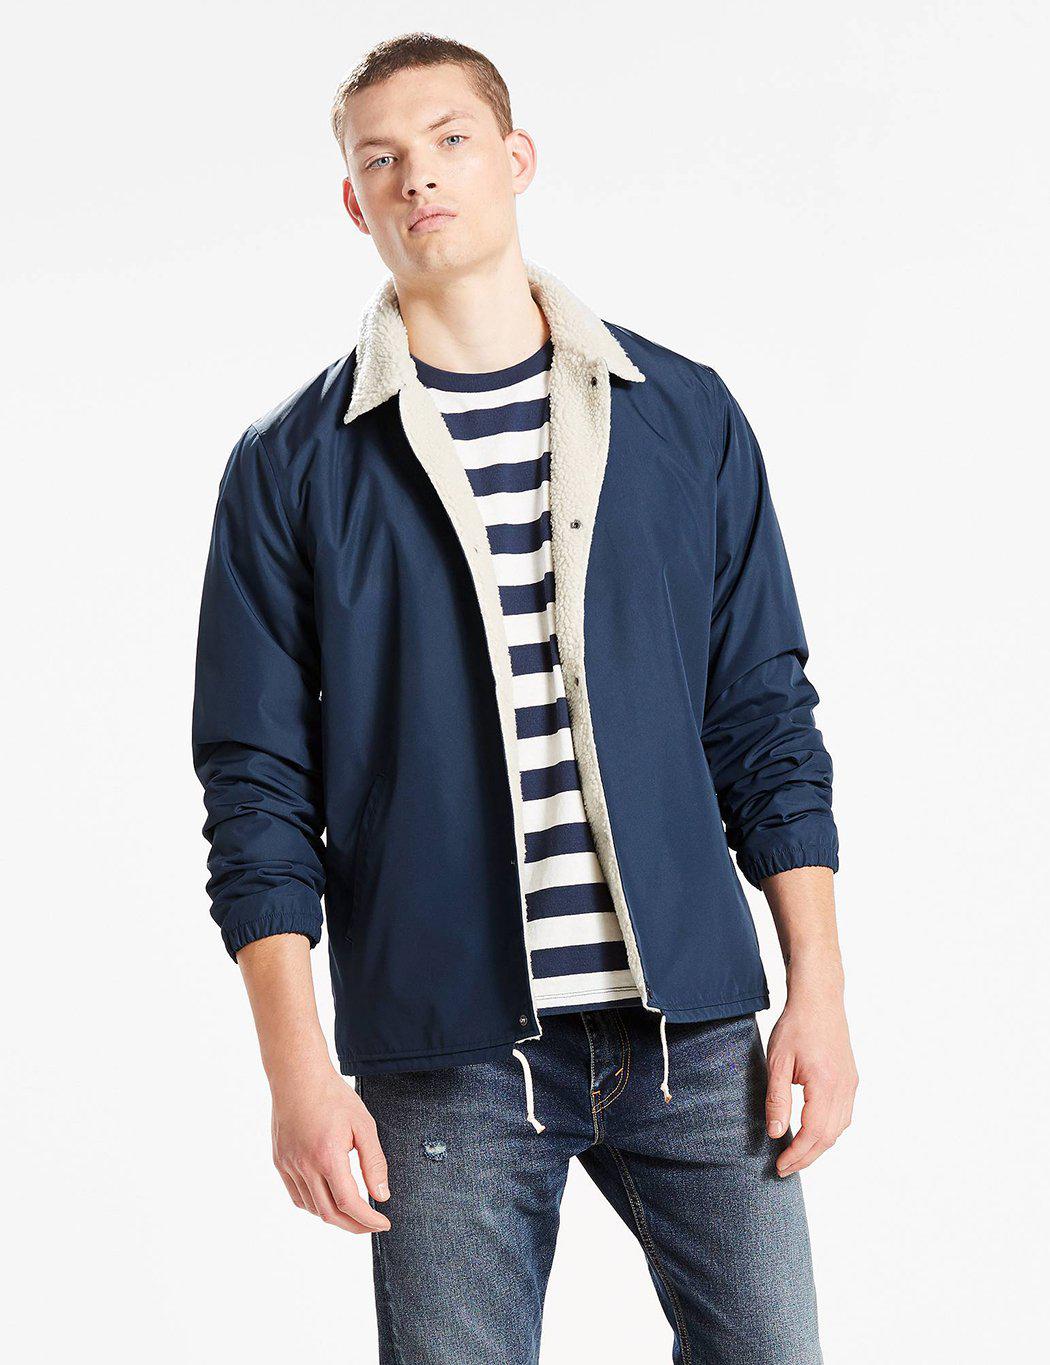 levis sherpa coach jacket Online shopping has never been as easy!